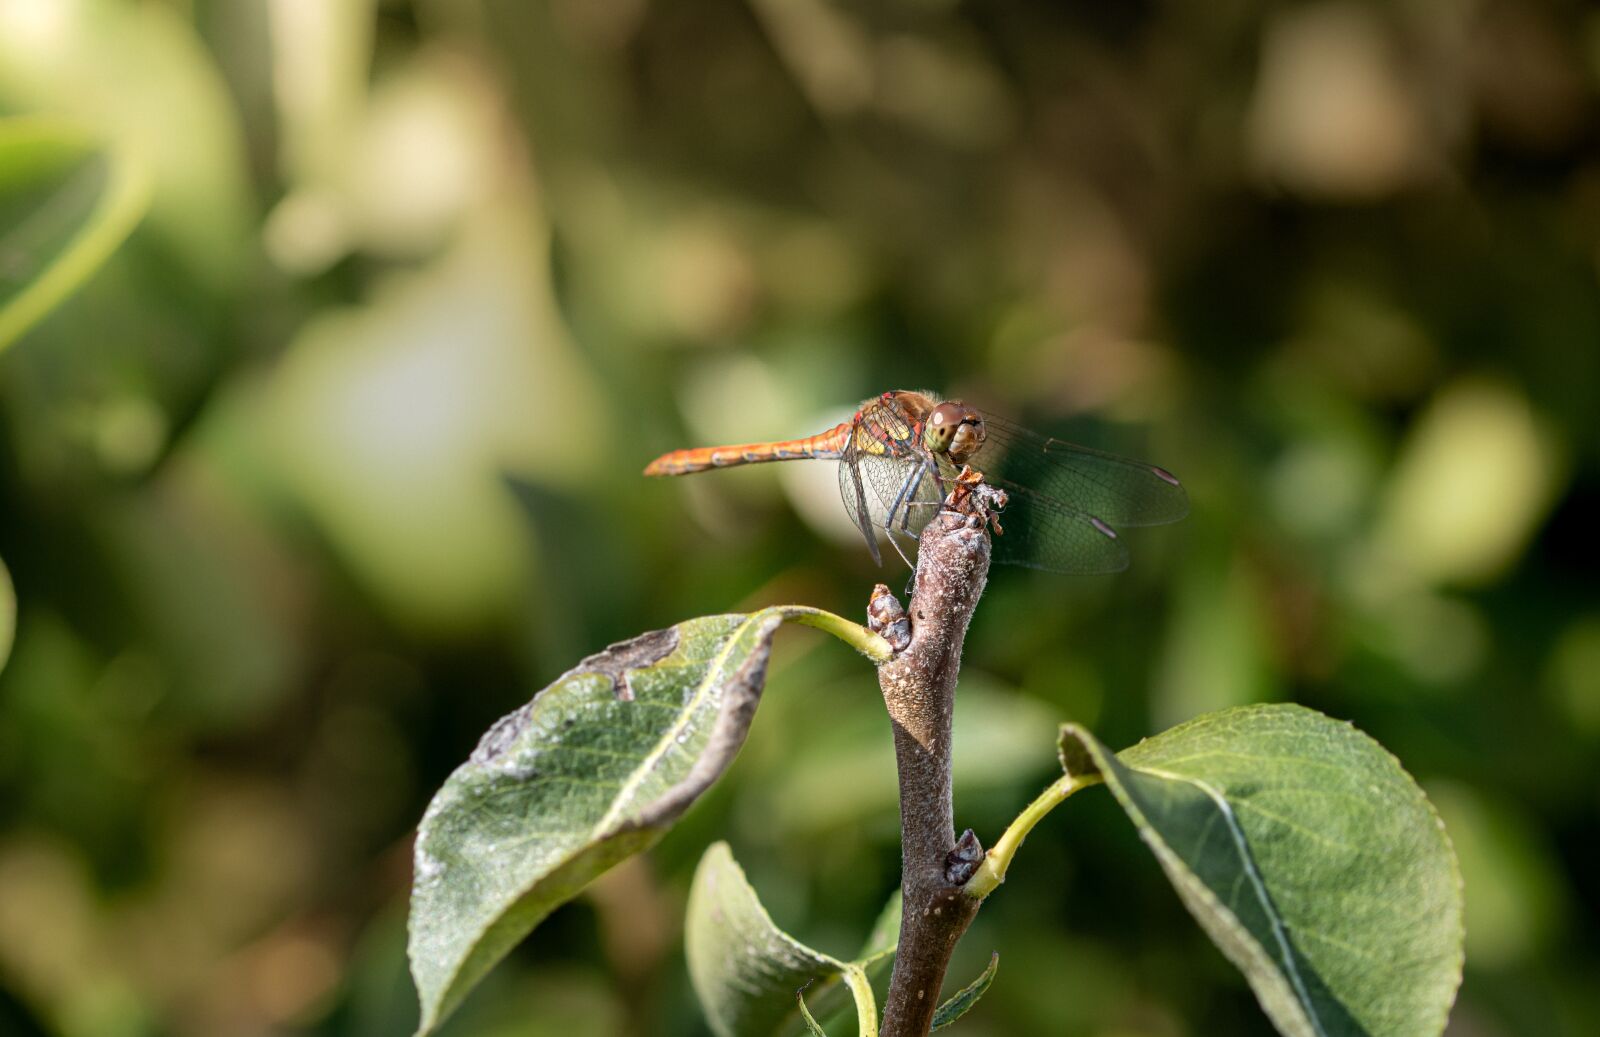 105mm F2.8 sample photo. Dragonfly, bug, insect photography